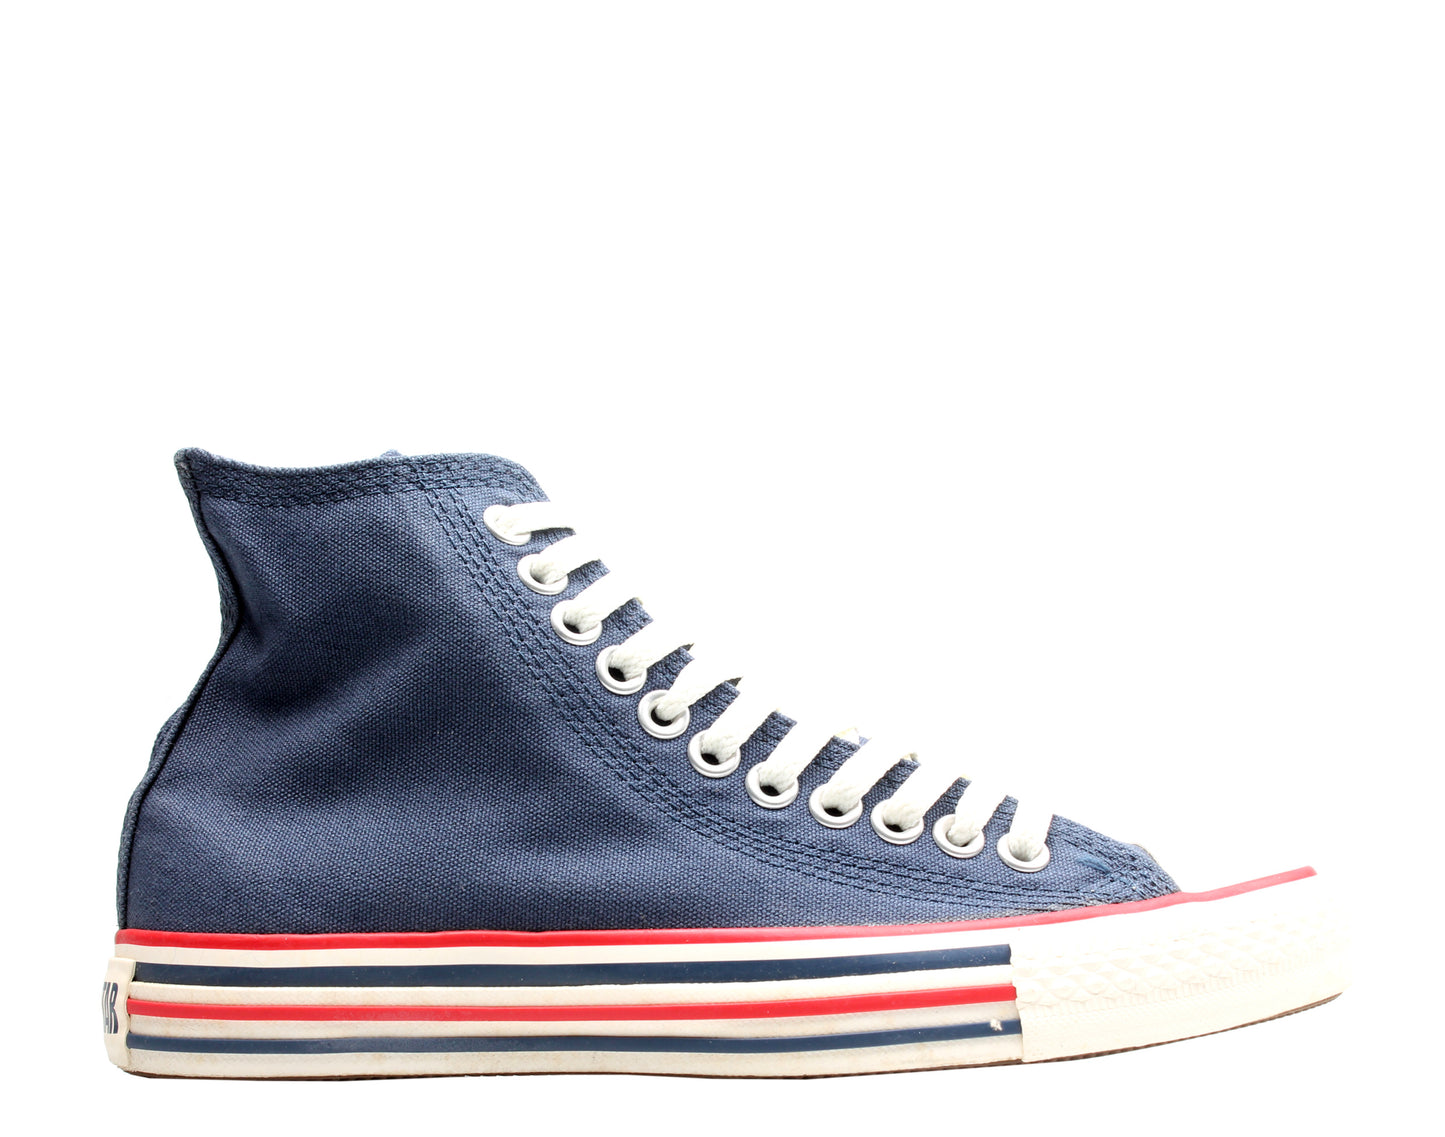 Converse Chuck Taylor All Star Double Details Hi Sneakers